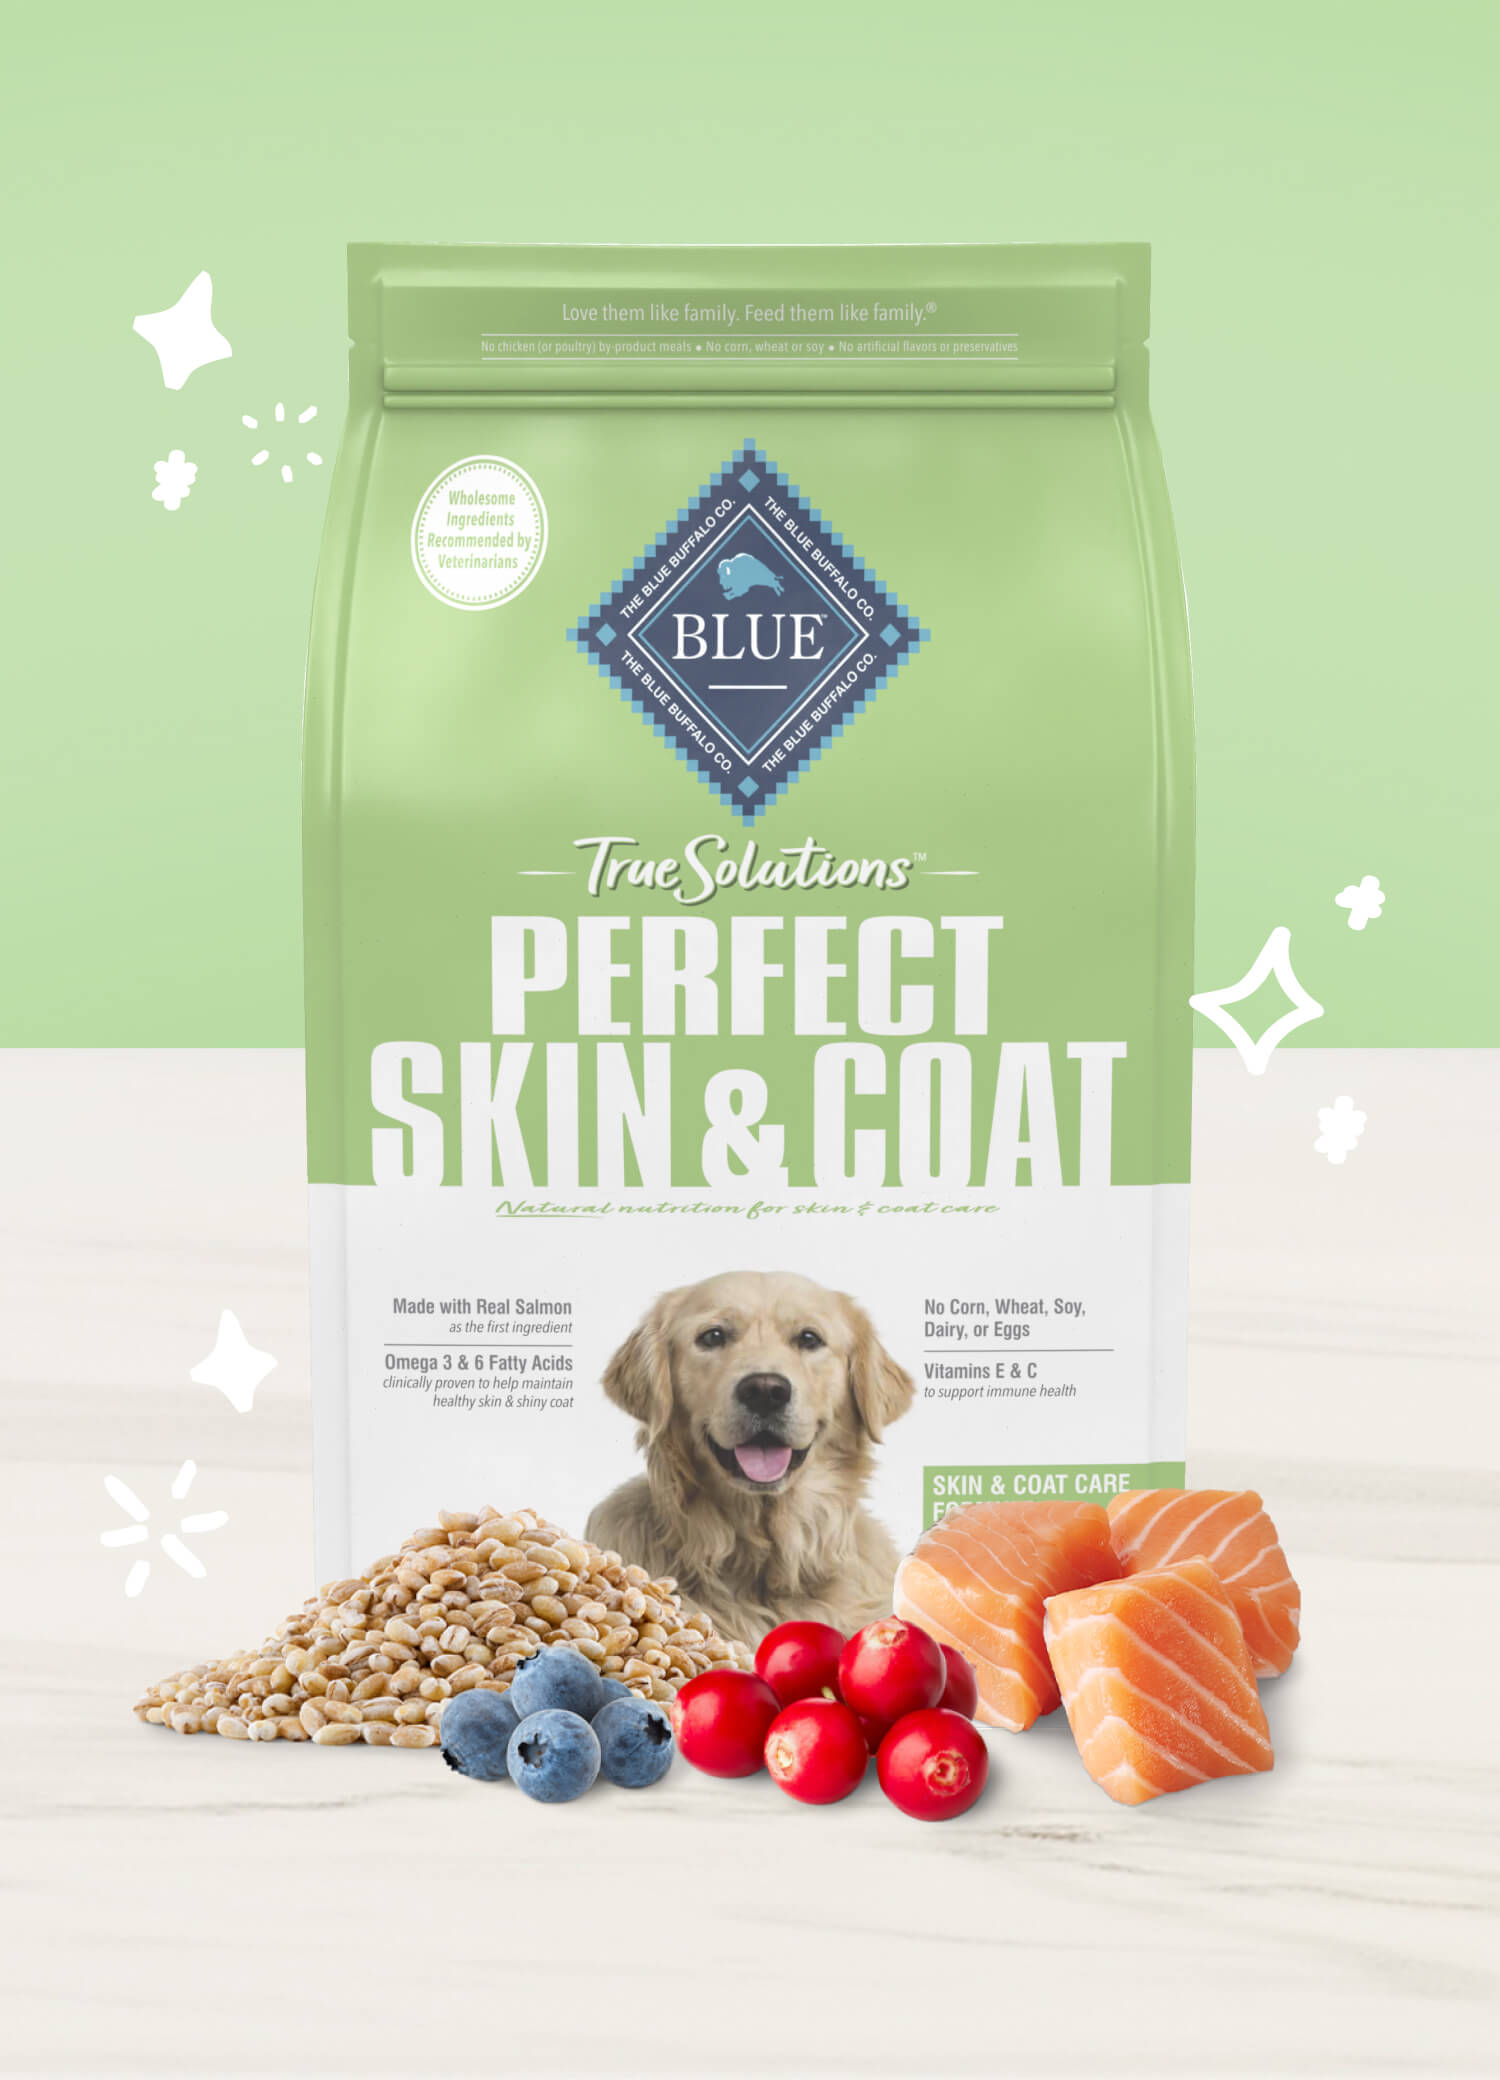 Blue true solutions perfect skin & coat care dog dry food